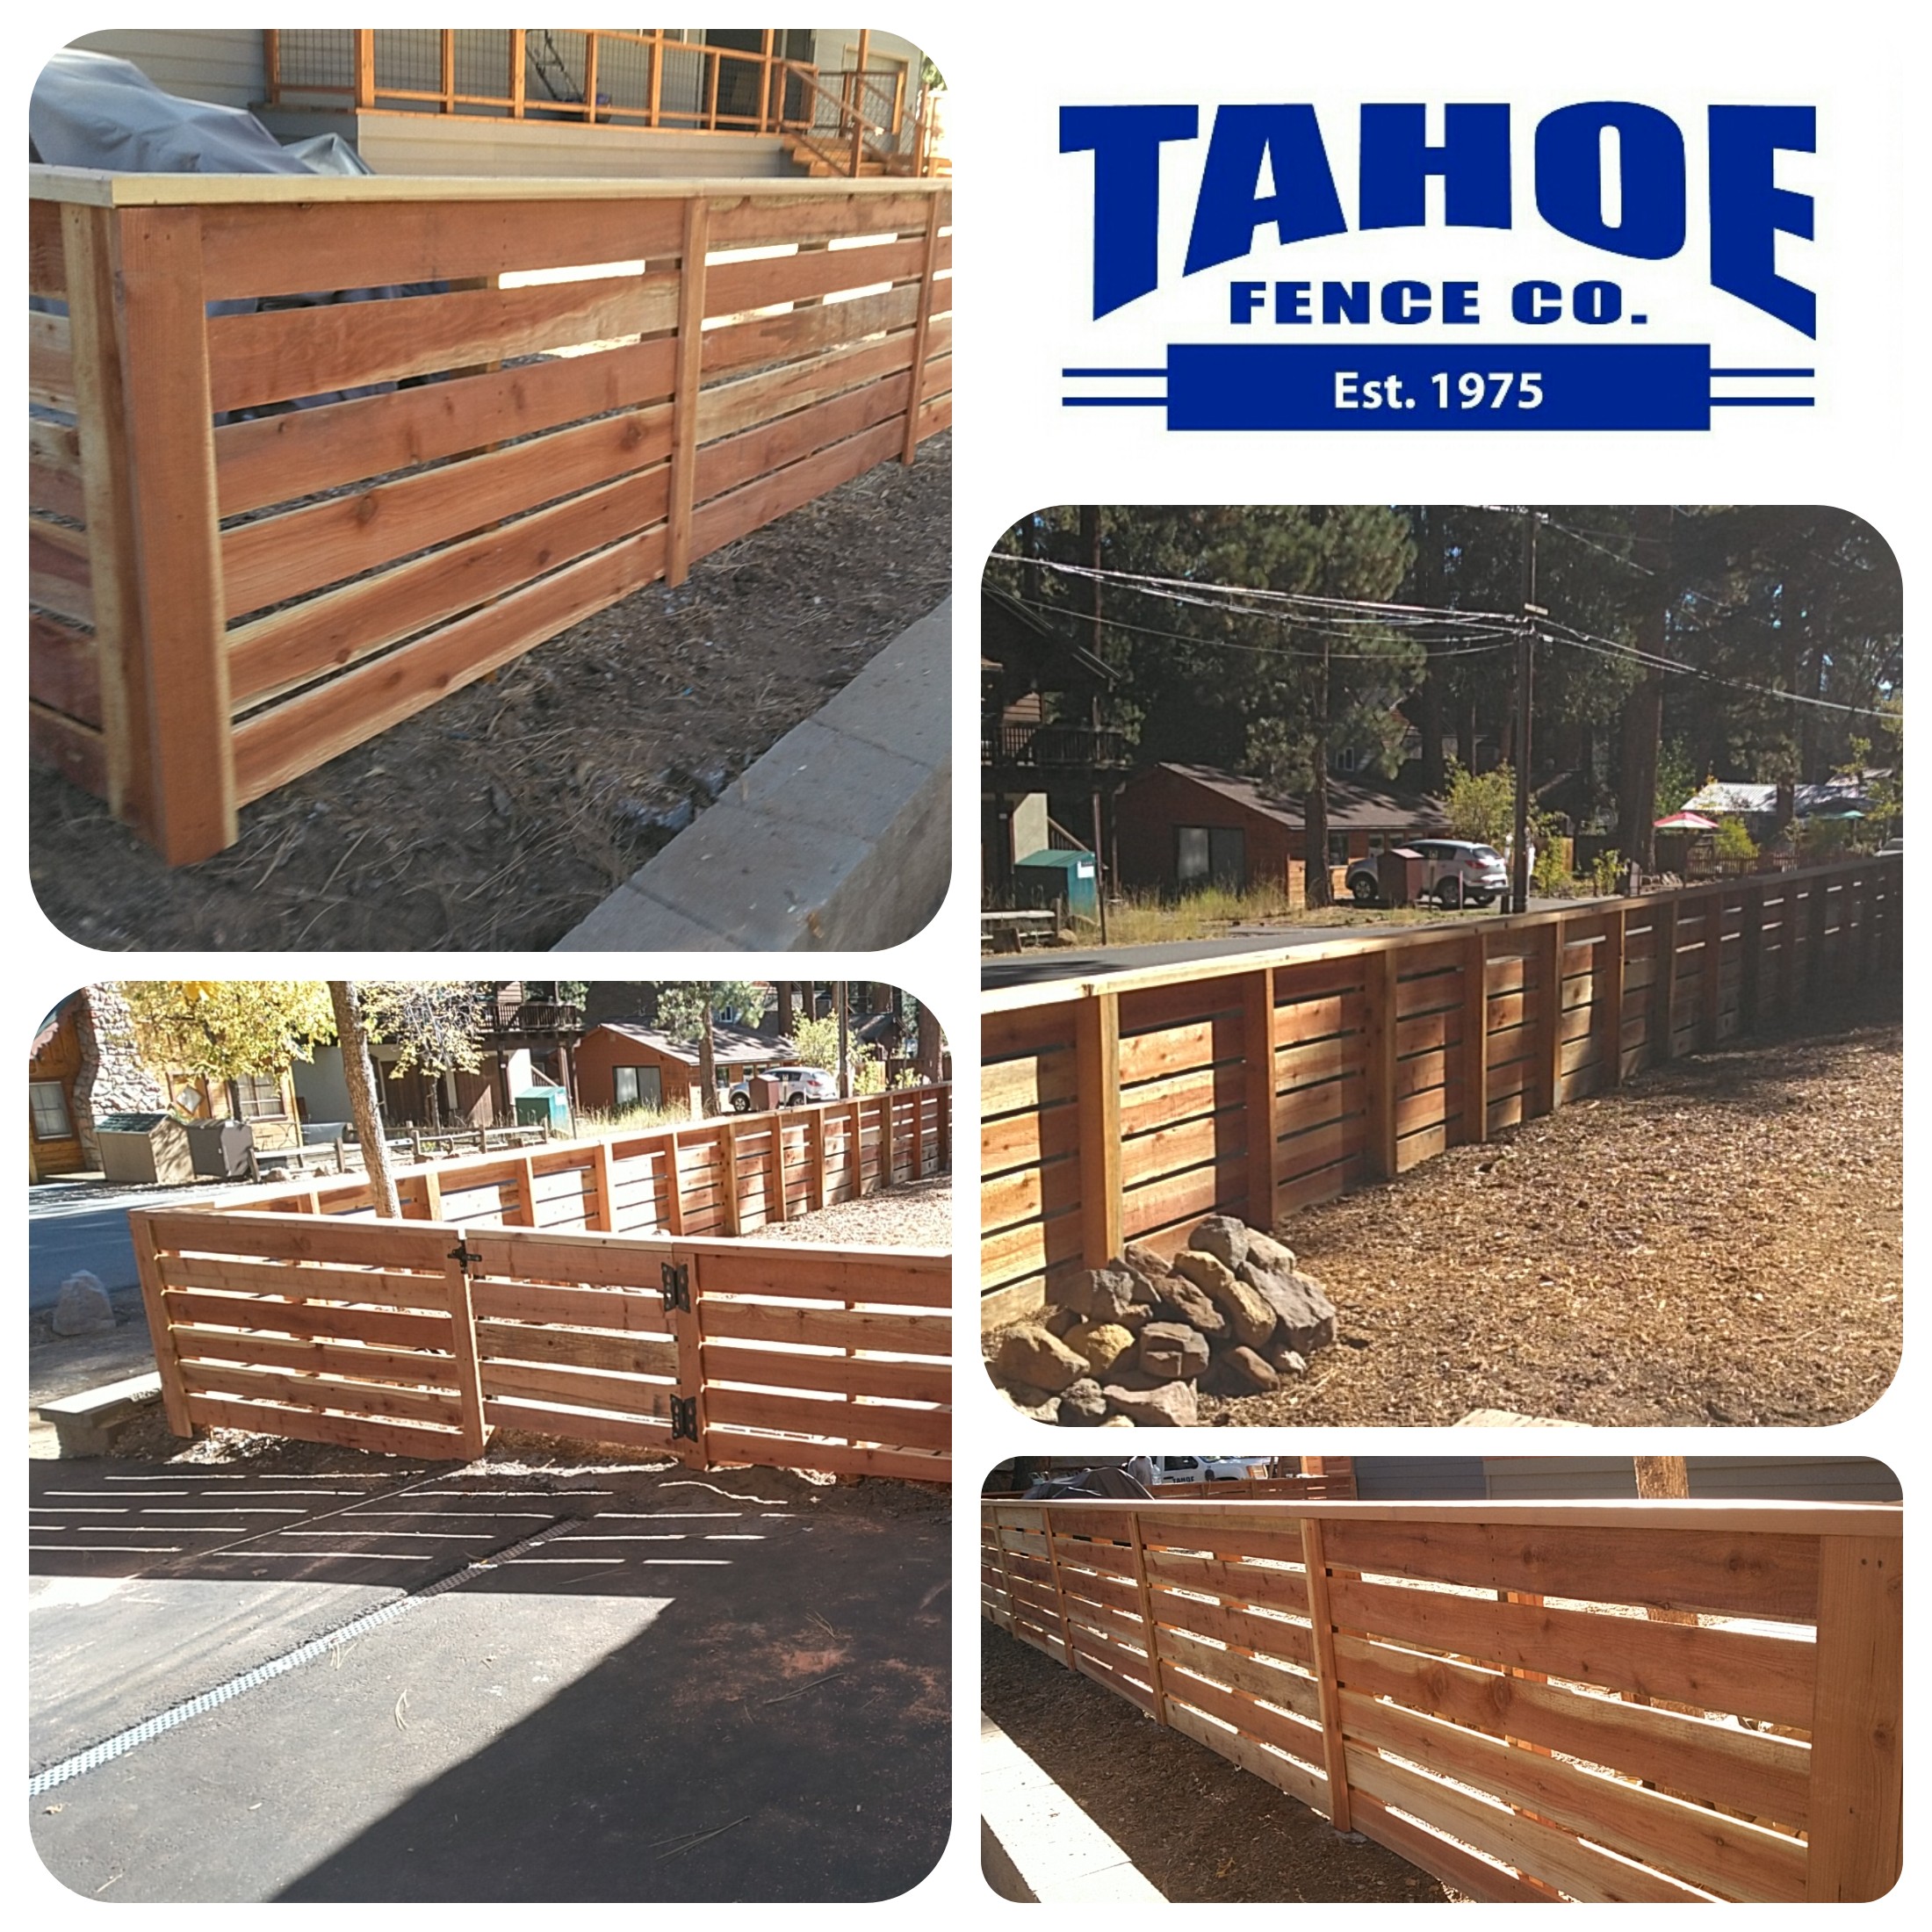 Just In Time With so much going on lately, you really have to make time for it all. Halloween just wrapped up. Daylight Savings Time ends this weekend. Elections this week. Before you know it, Thanksgiving will be here and so will Winter. Tahoe's crews built this beautiful, redwood fence just in time before the wet weather arrived. It's a horizontal fence with gapped boards, a top cap, and 2x4 vertical supports between posts in Tahoe Vista (Placer County.) 